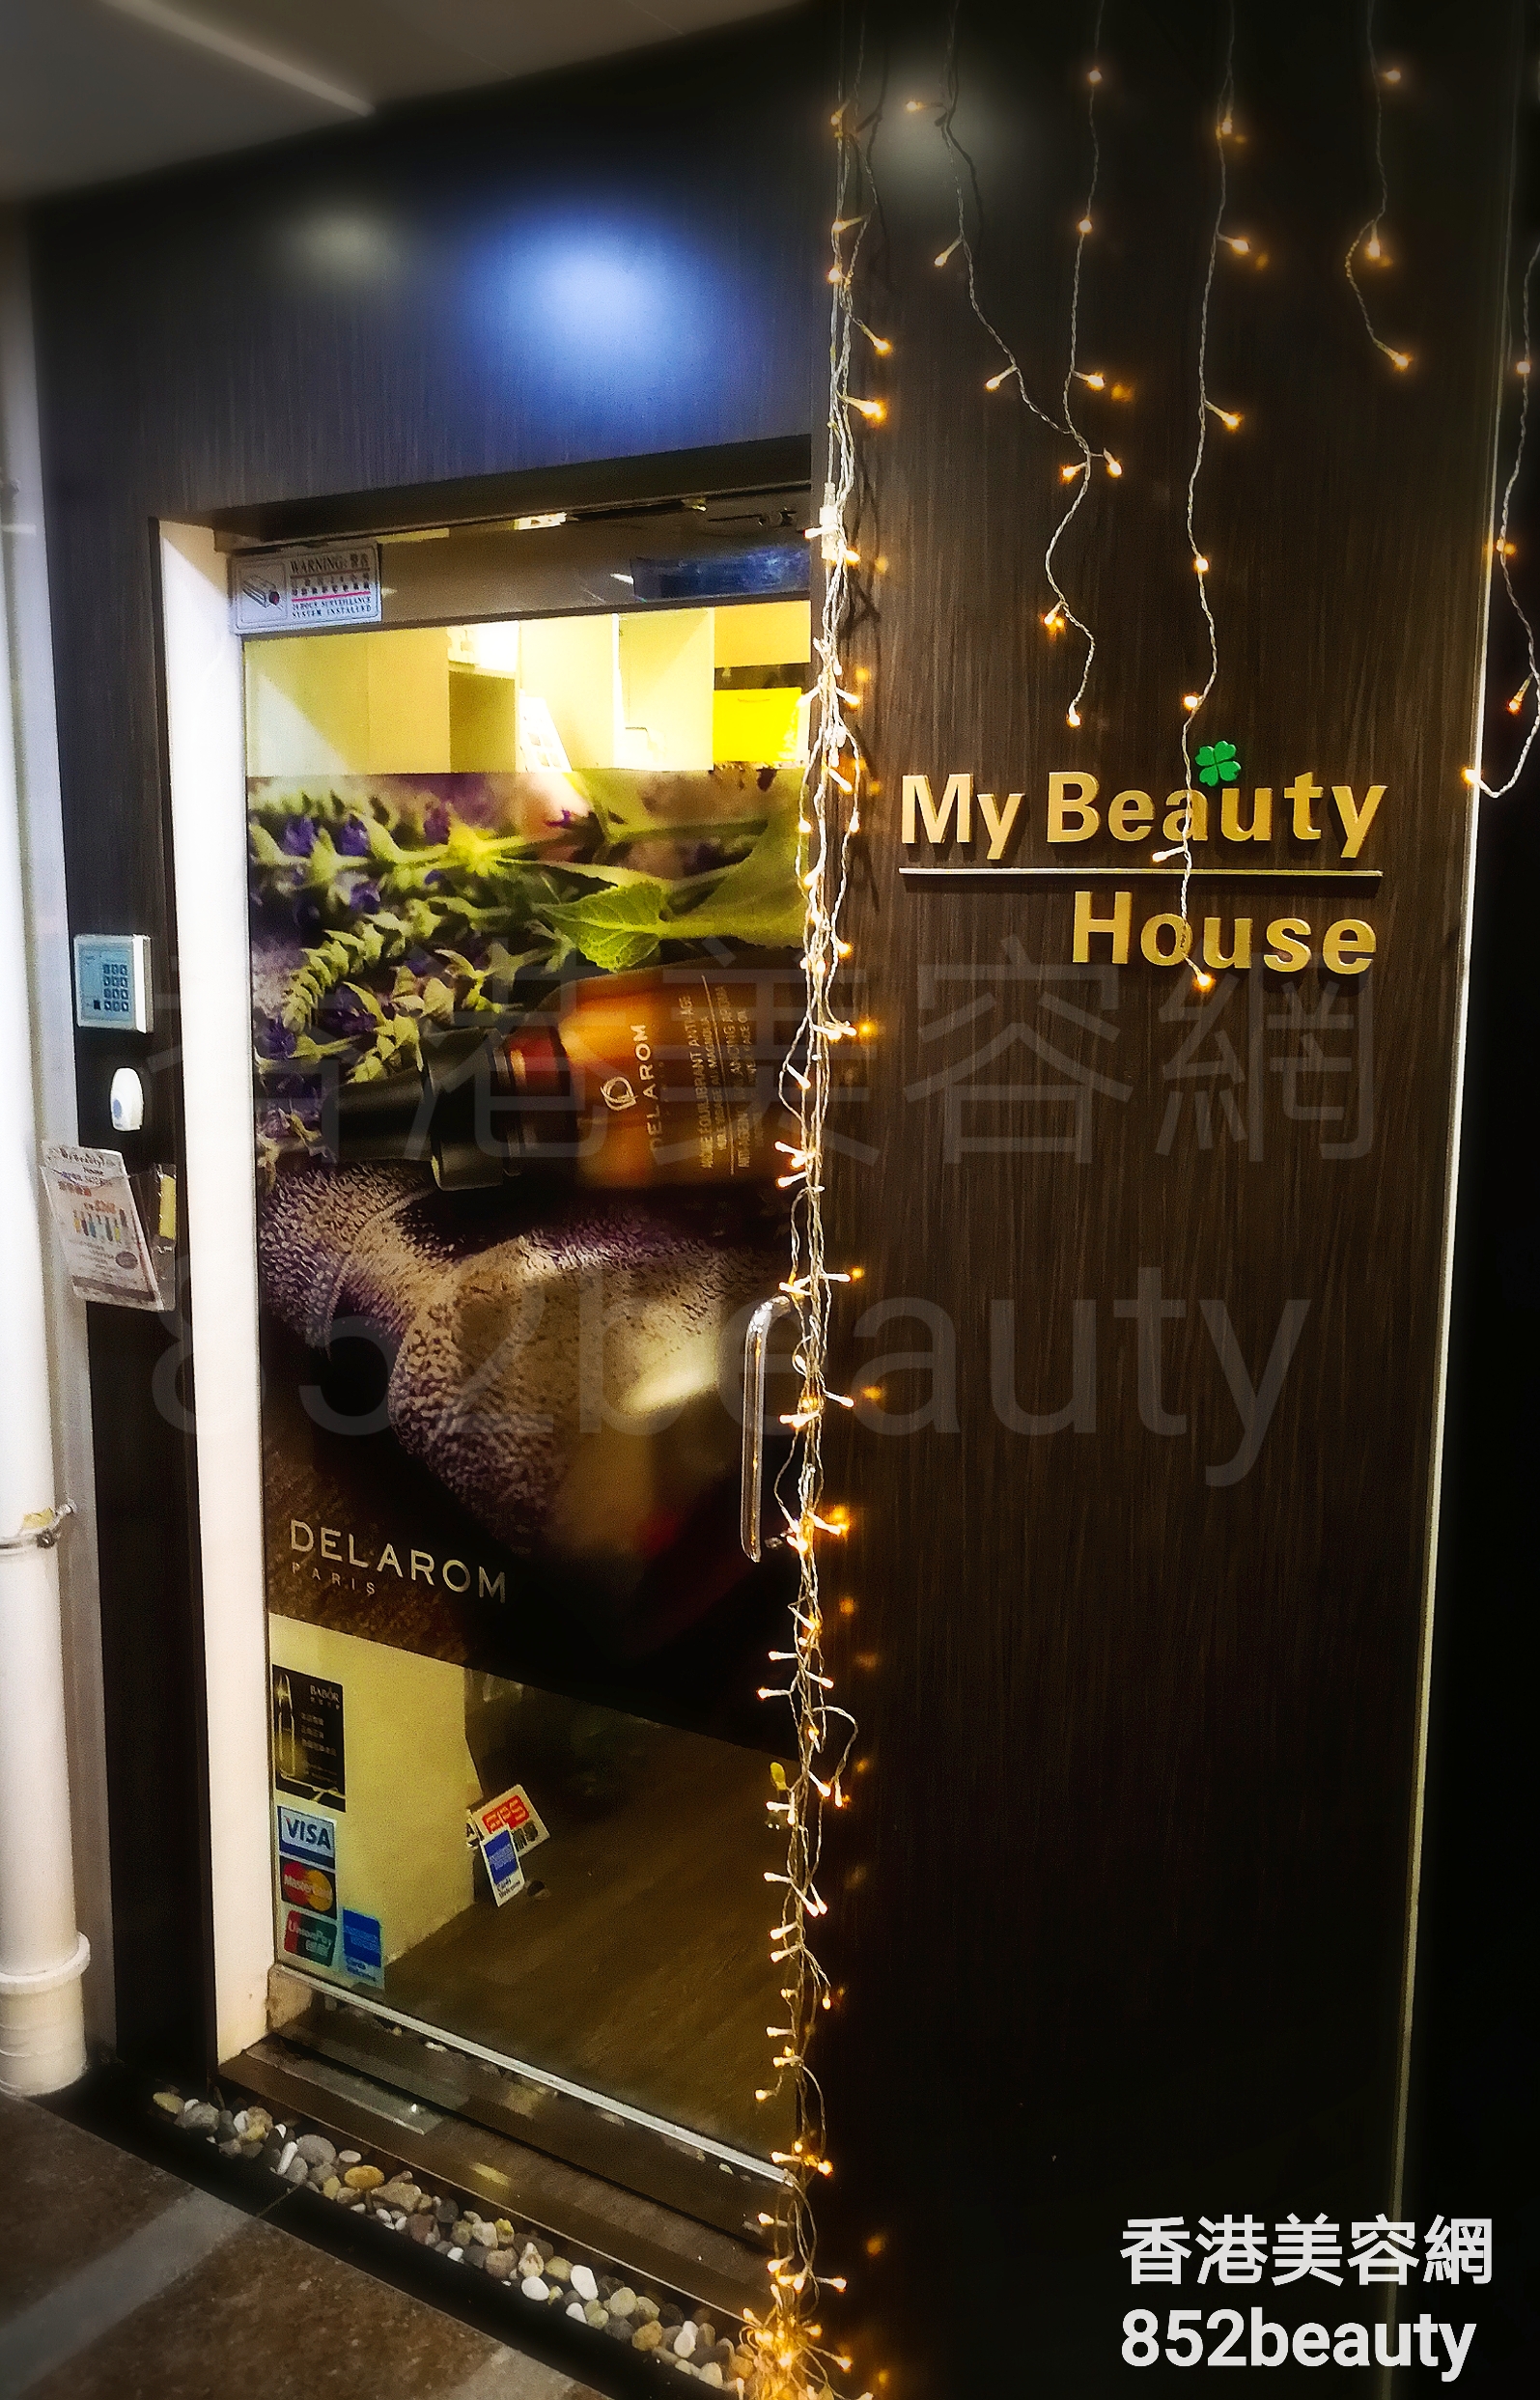 Hair Removal: My Beauty House